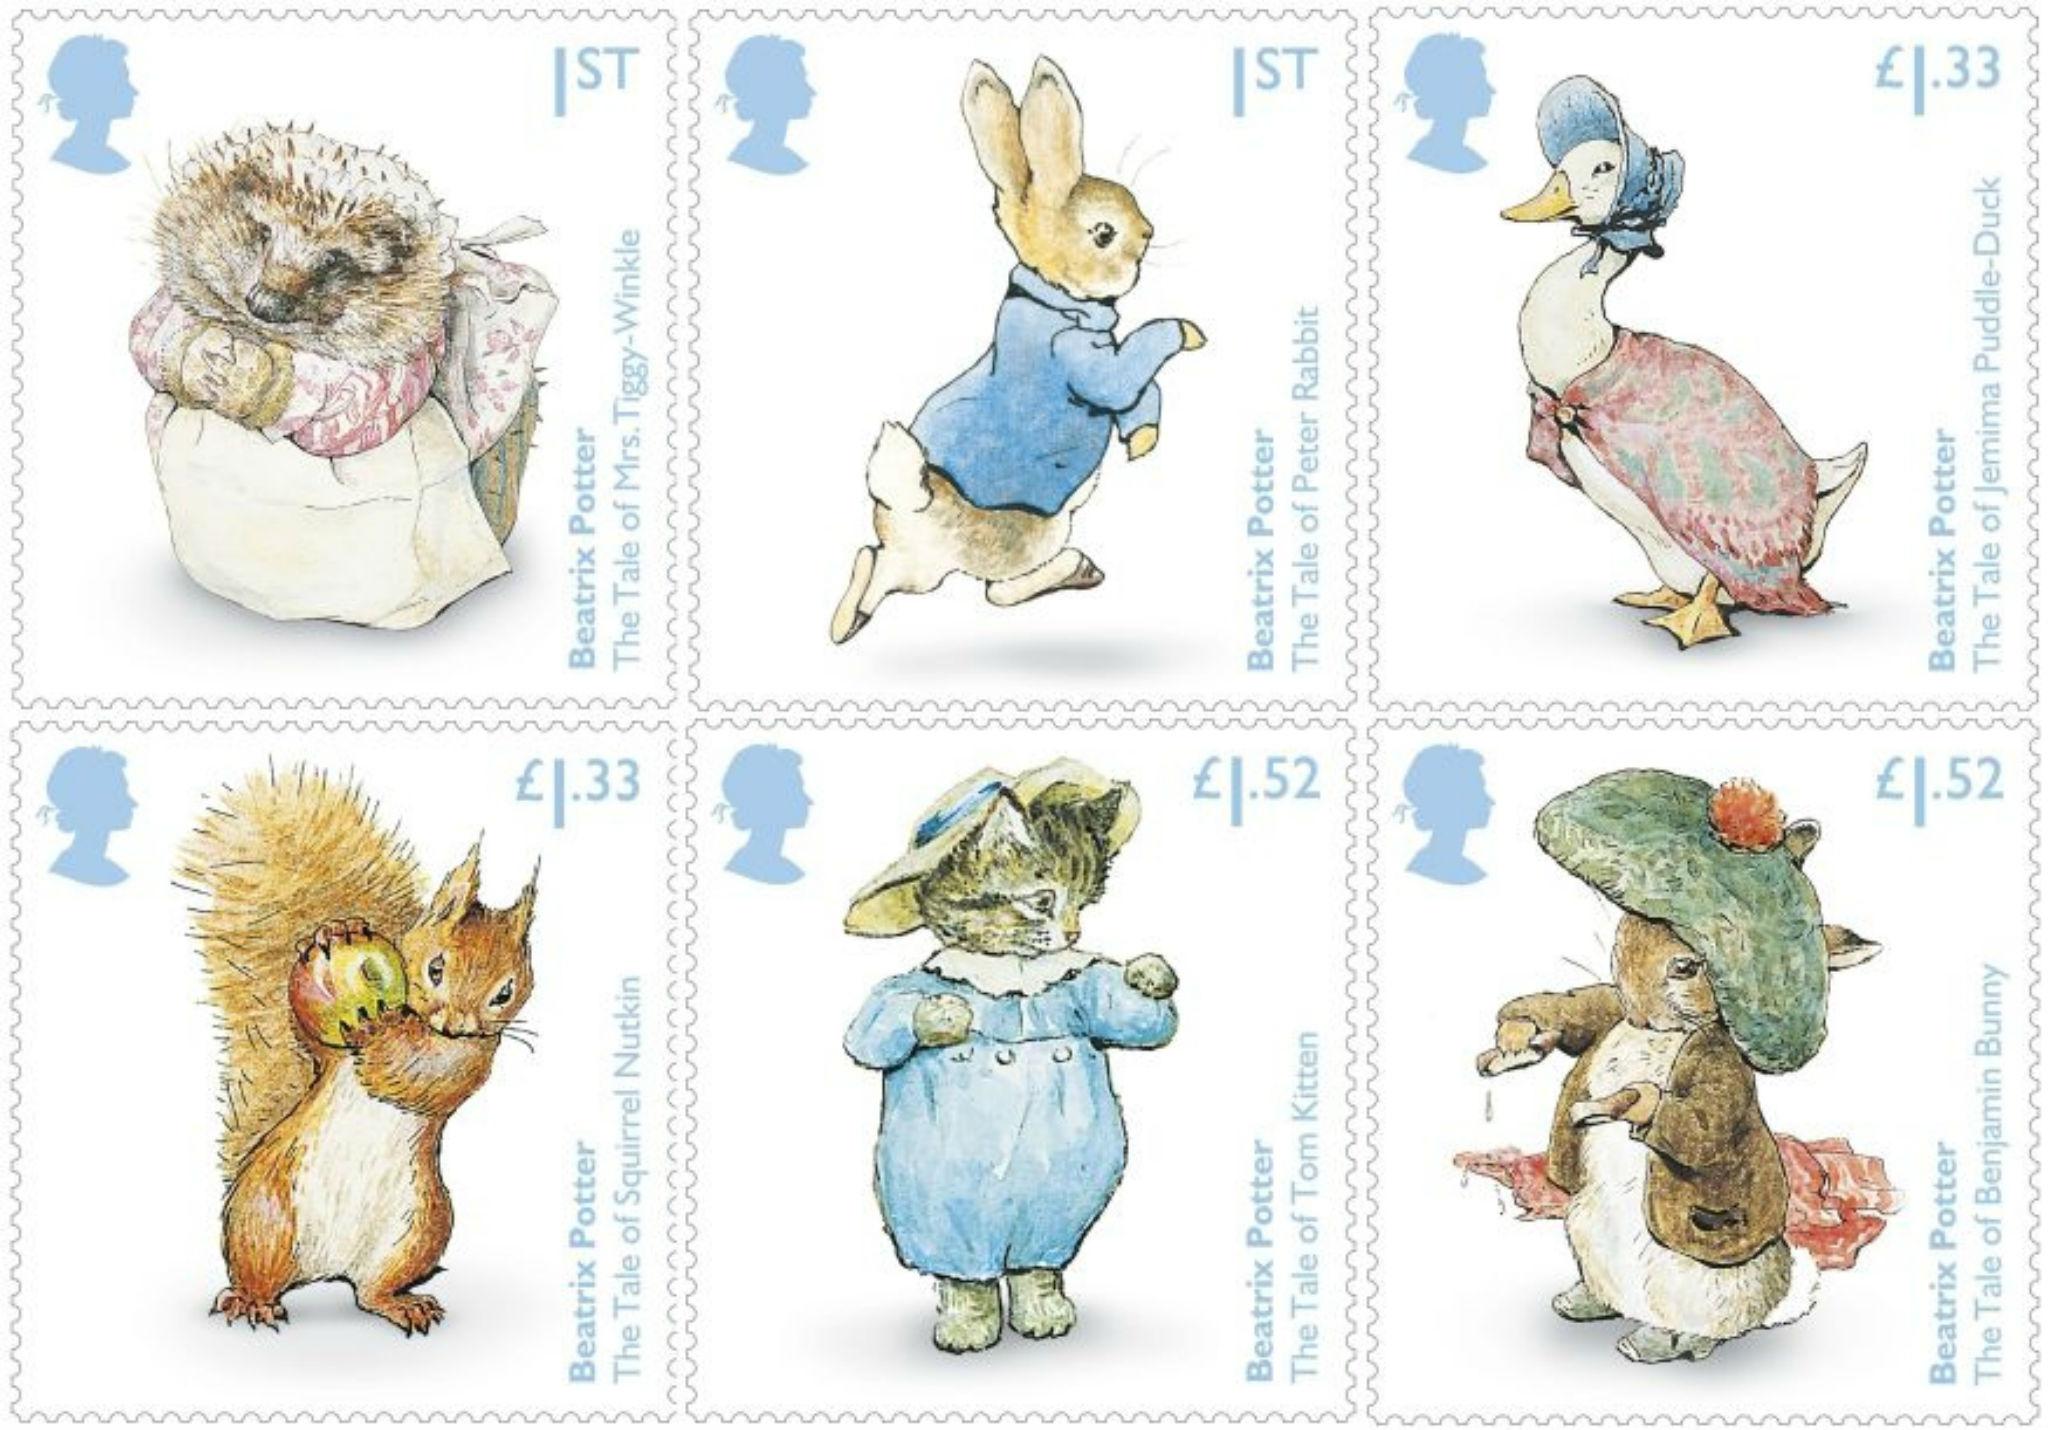 beatrix-potter-stamps-released-by-royal-mail-to-mark-author-s-150th